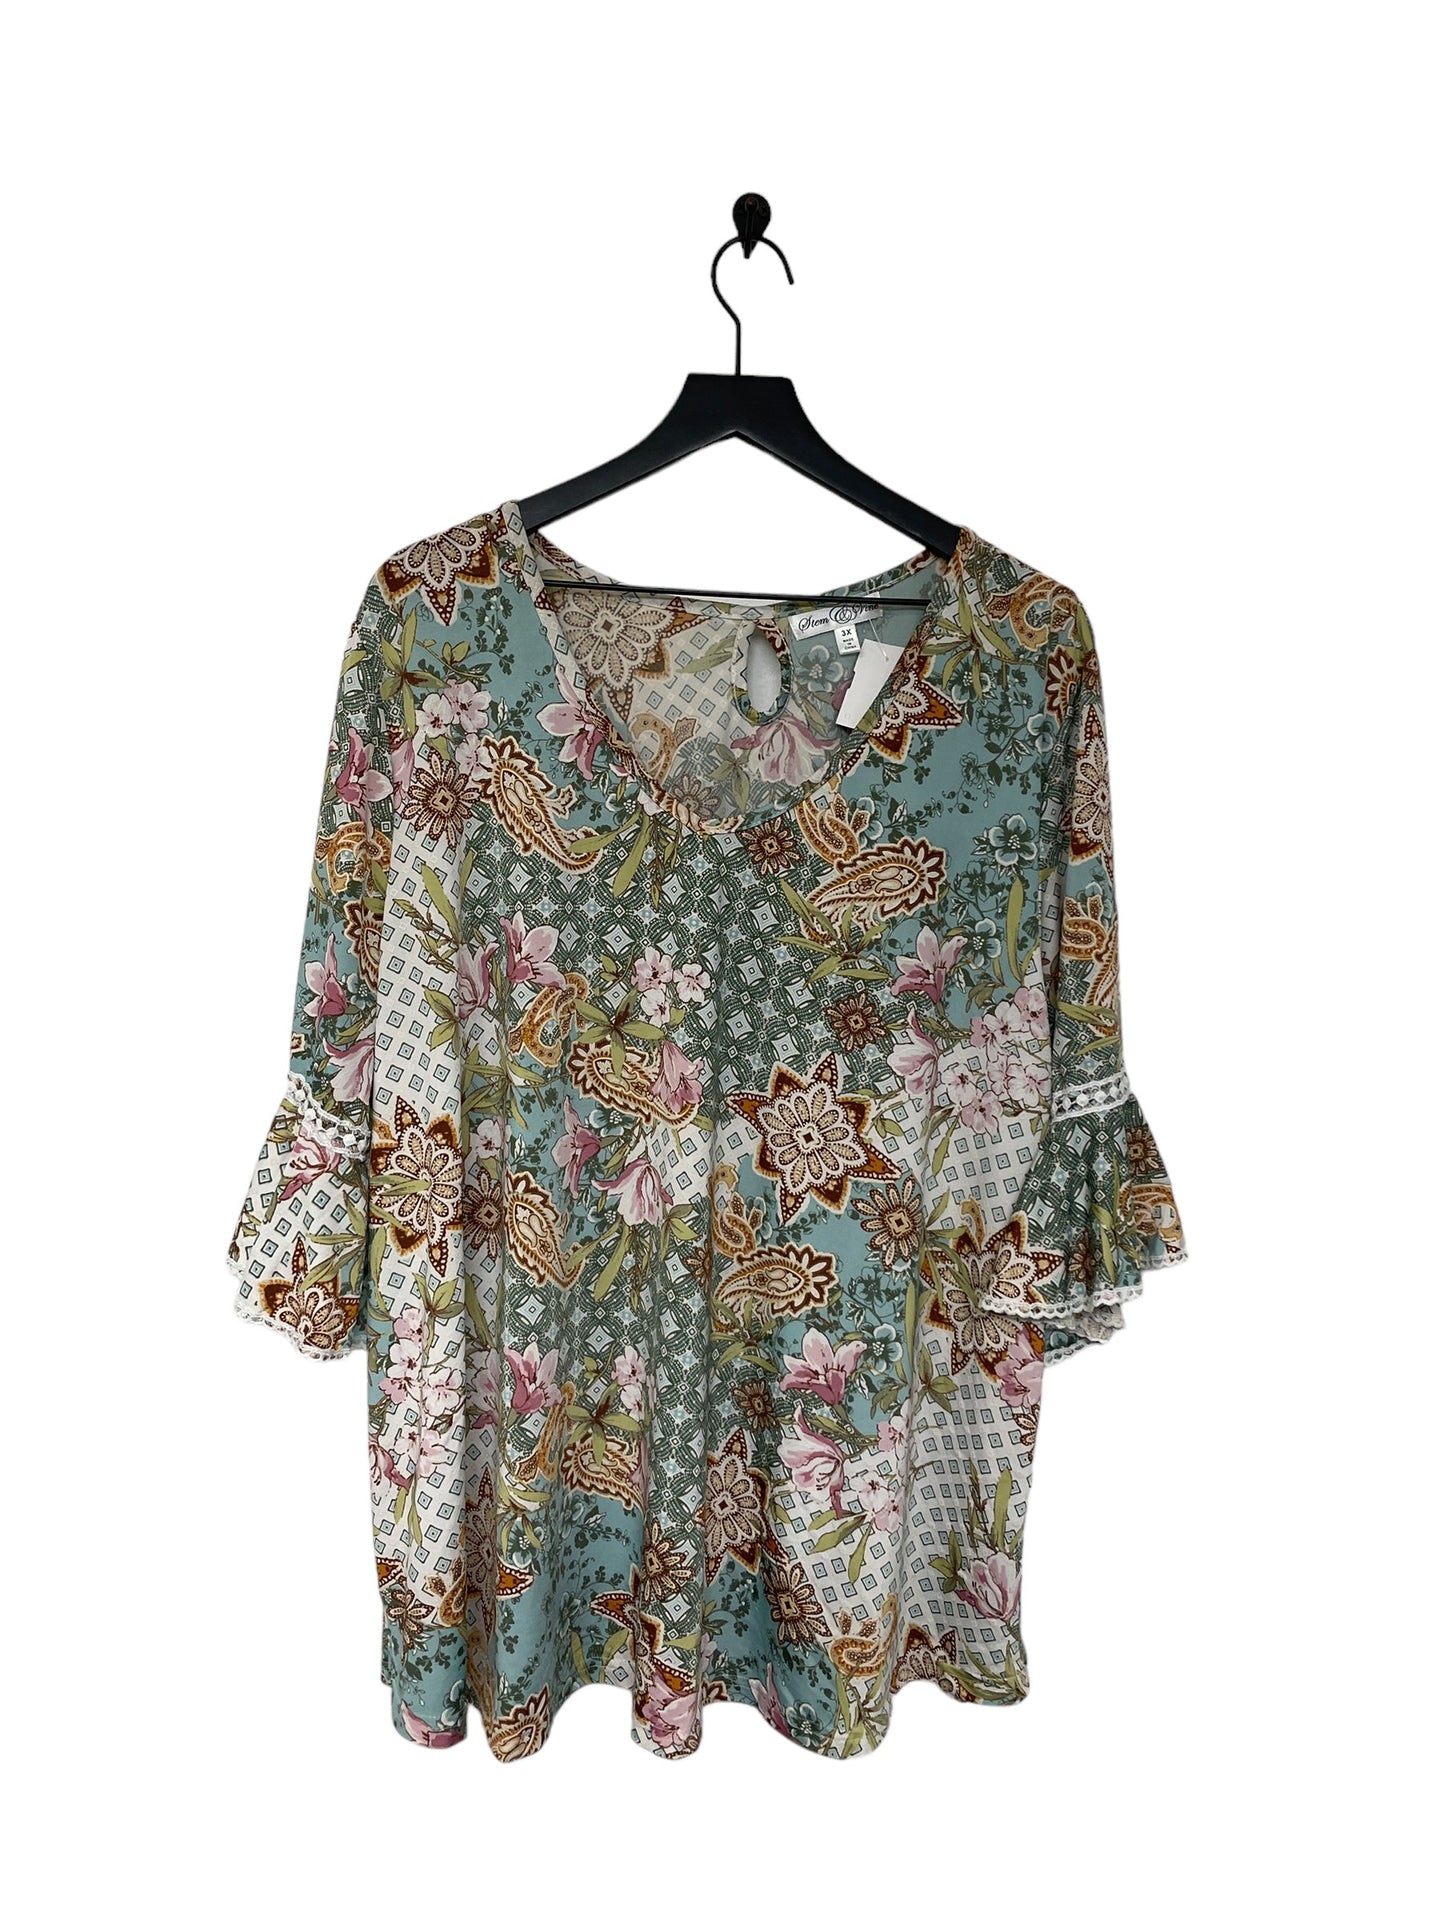 Floral Print Top Long Sleeve Cme, Size 3x